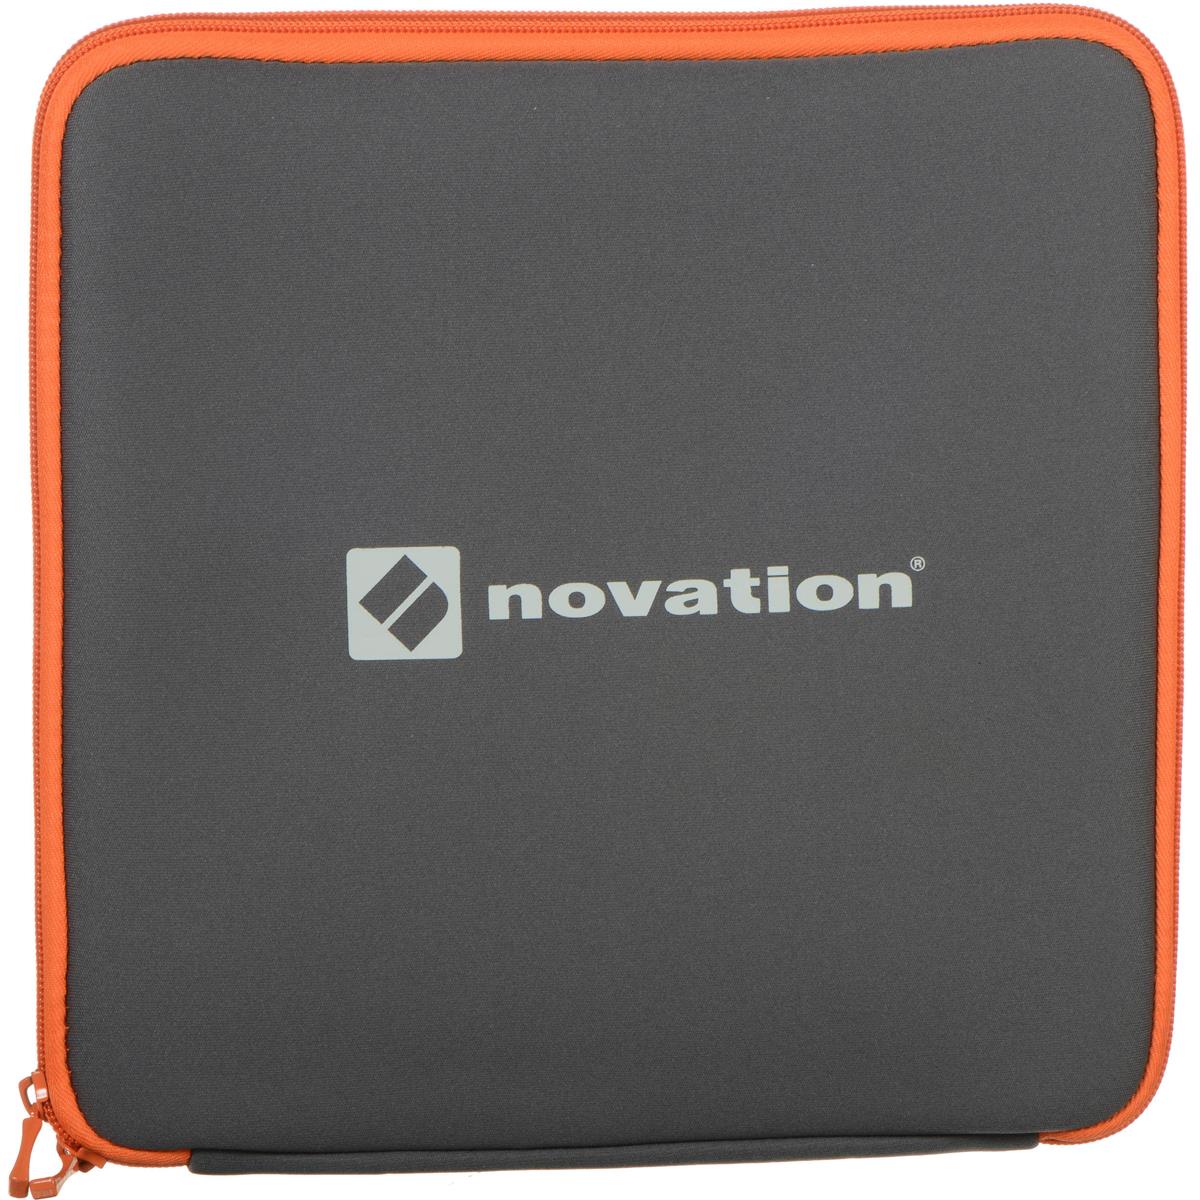 Image of Novation Neoprene Sleeve for Launchpad/Launch Control XL Controller